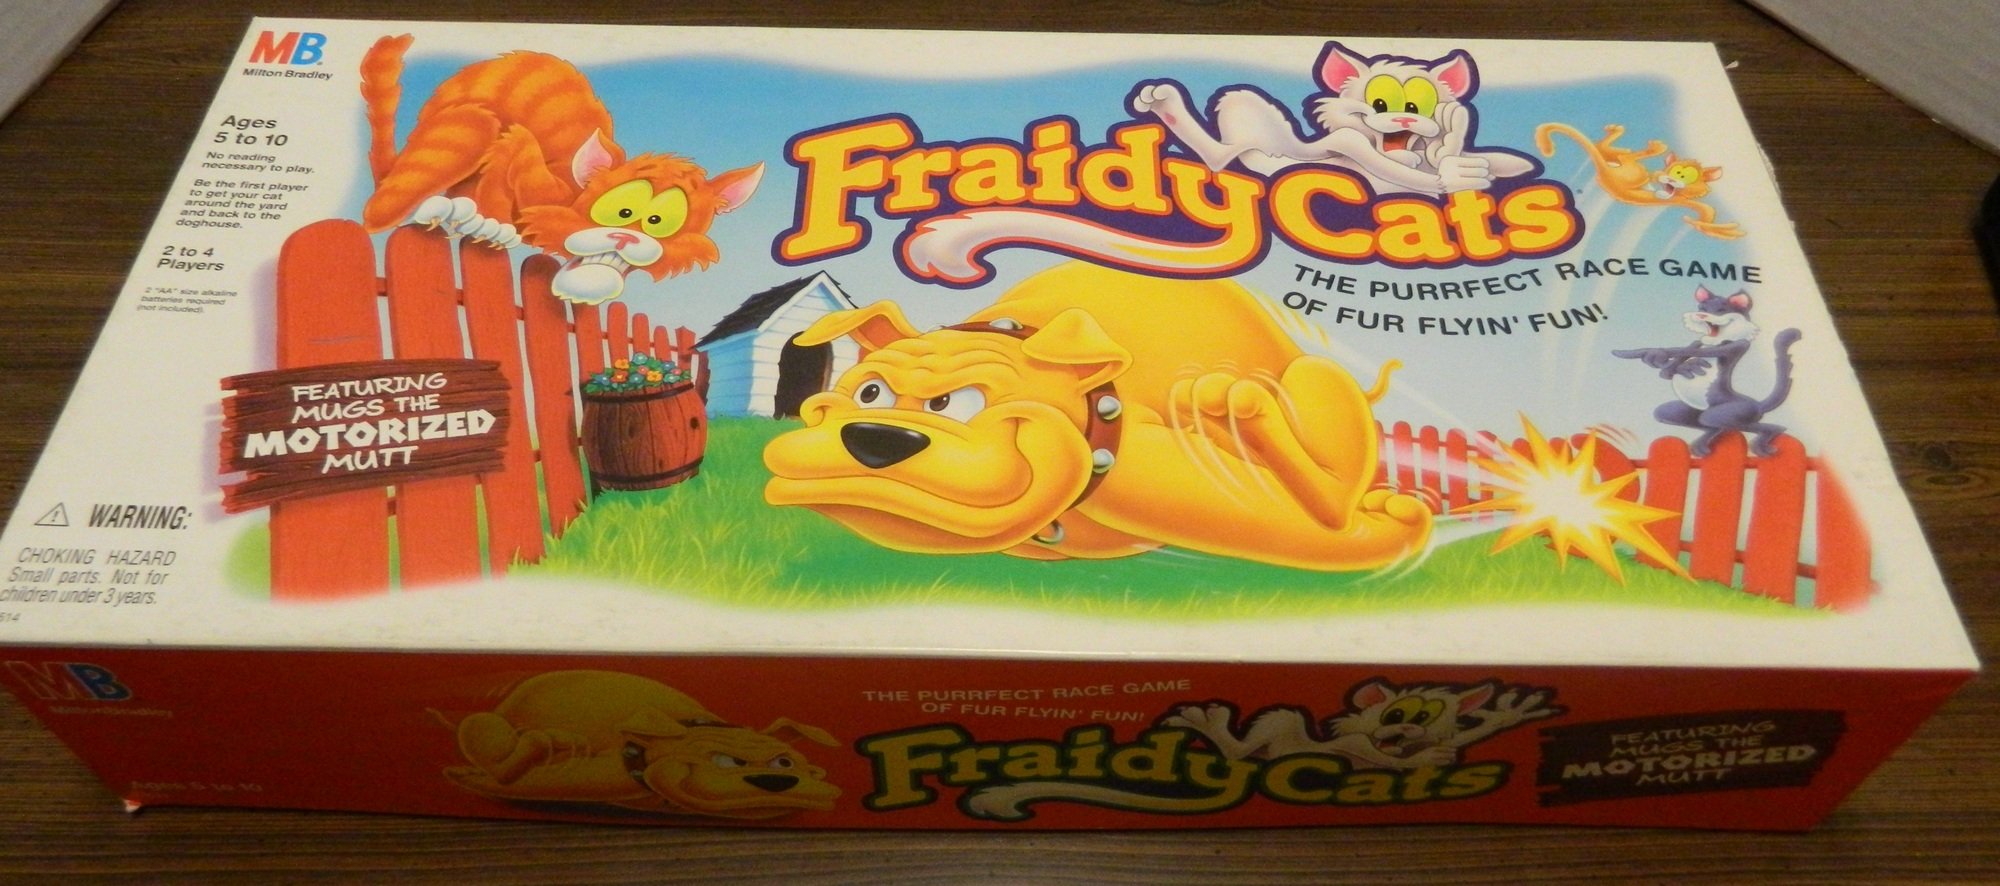 Fraidy Cats Board Game Review and Rules - Geeky Hobbies